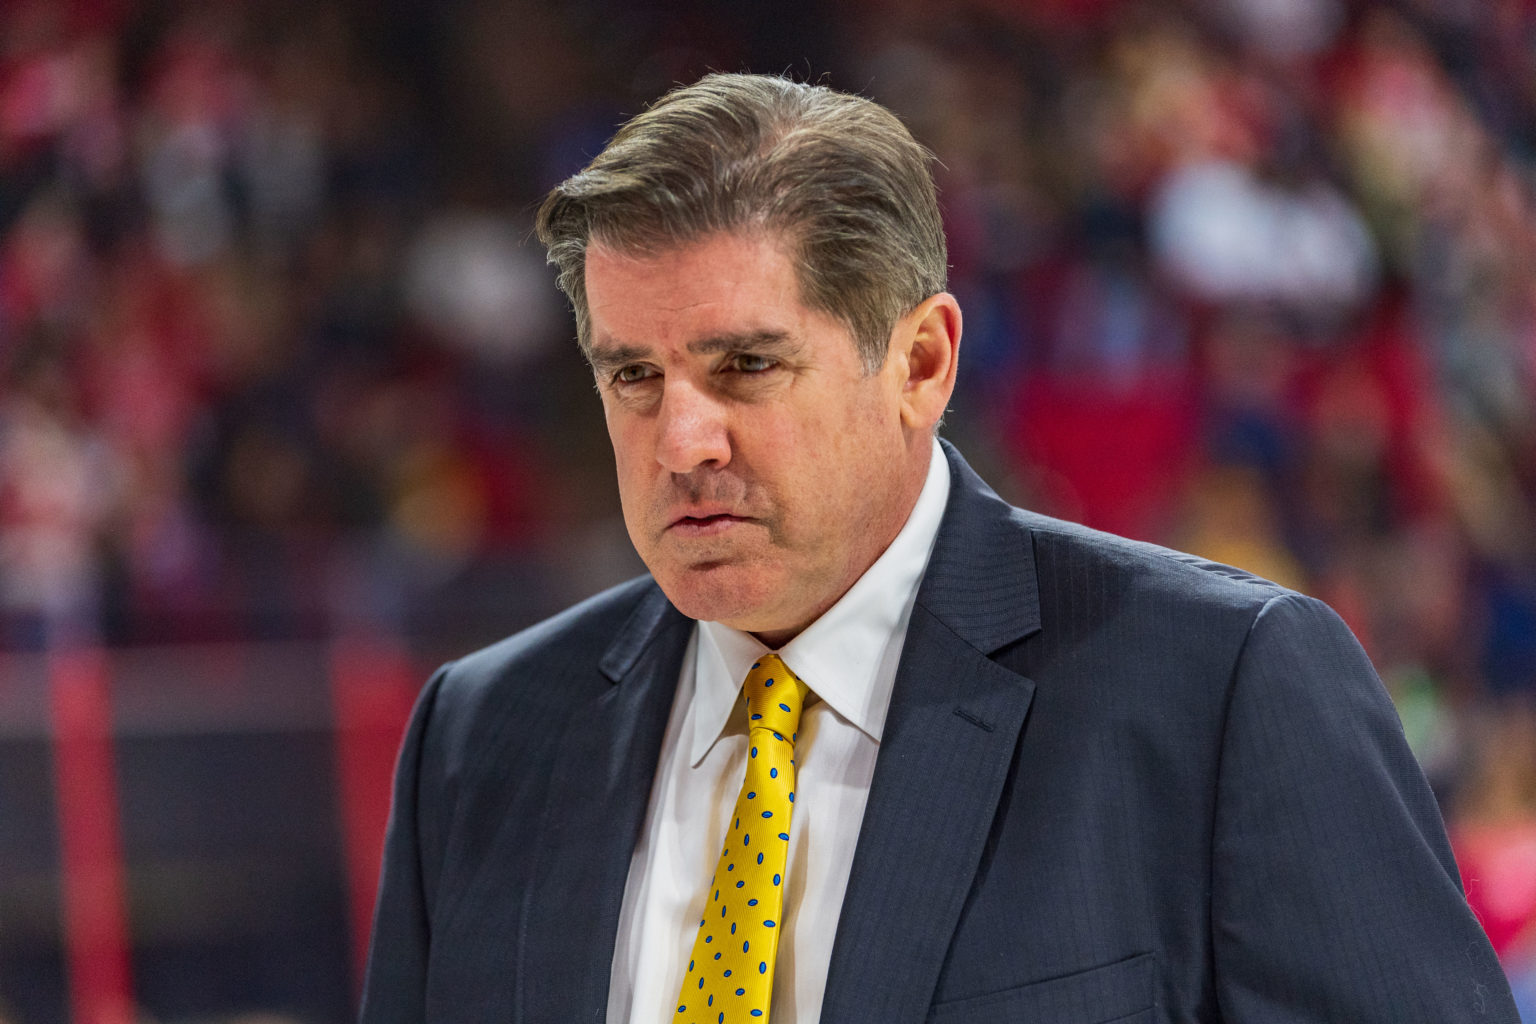 Peter Laviolette Takes Over as New Washington Capitals Head Coach